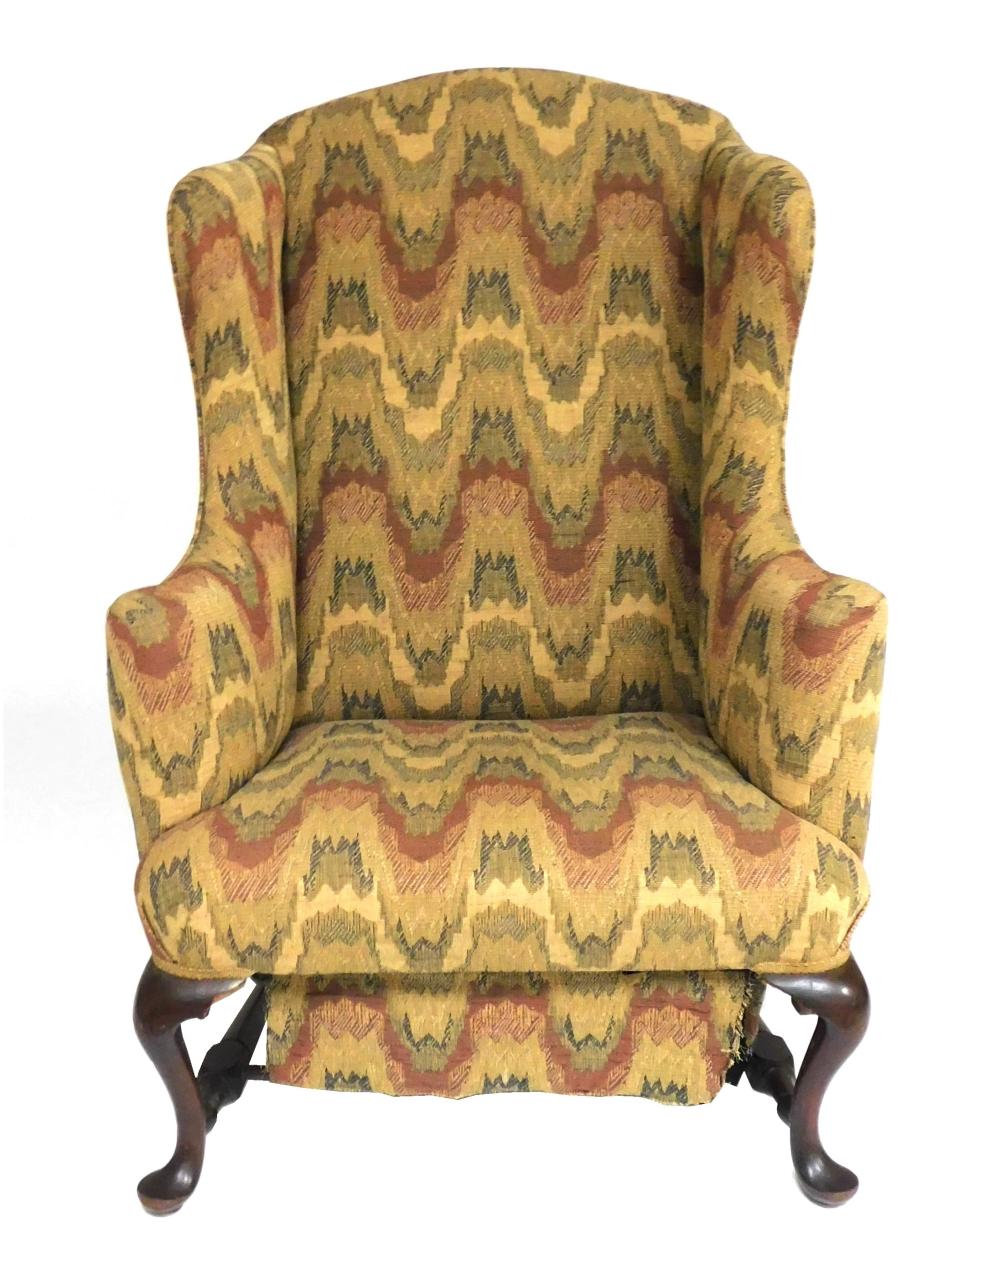 UPHOLSTERED ARMCHAIR 20TH C  2e2af5